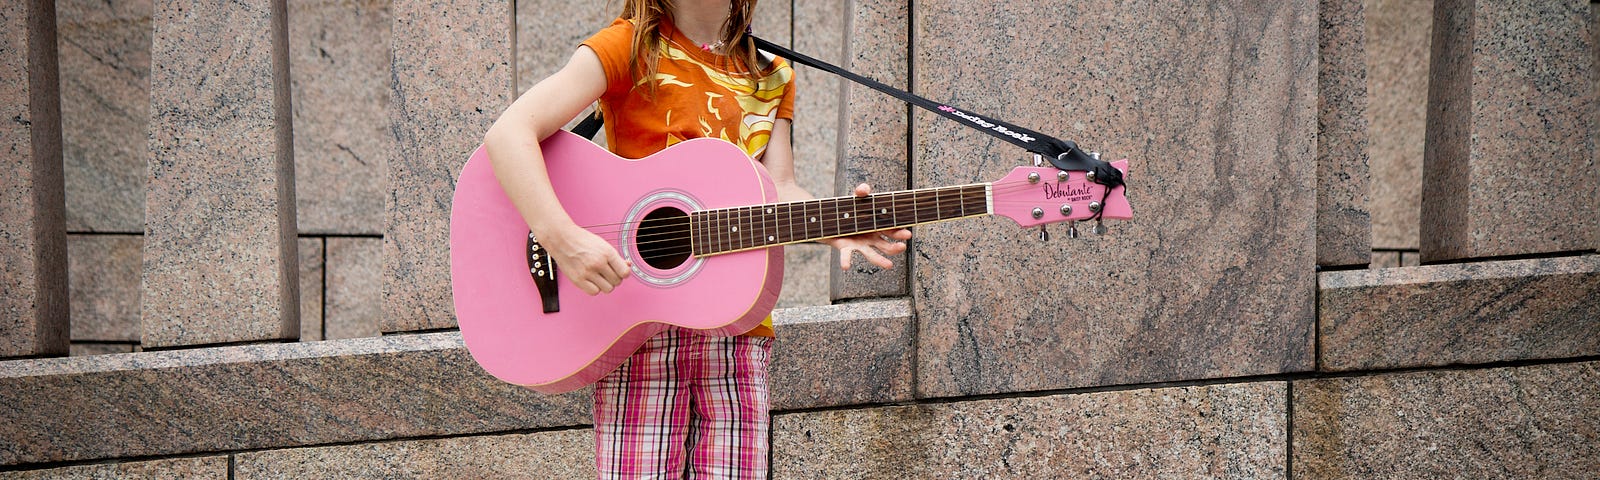 Young girl playing a pink guitar in the street